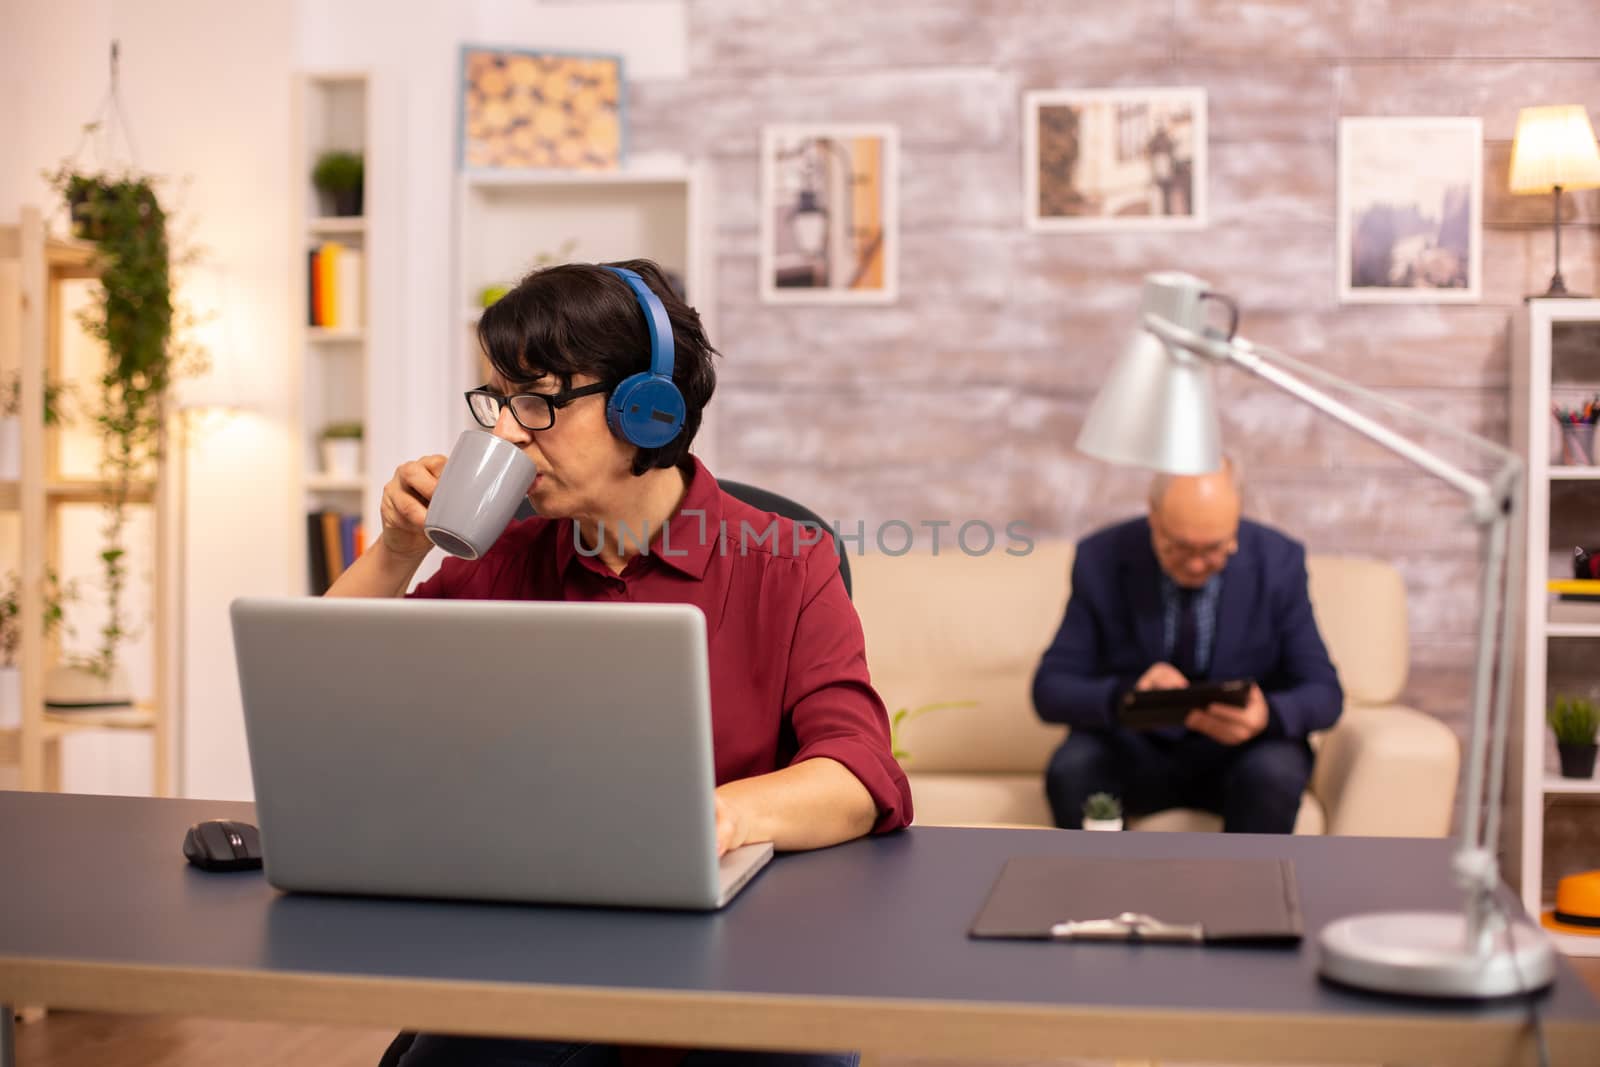 Concept photo of old lady using modern technology. He uses wirelles headphones and a laptop